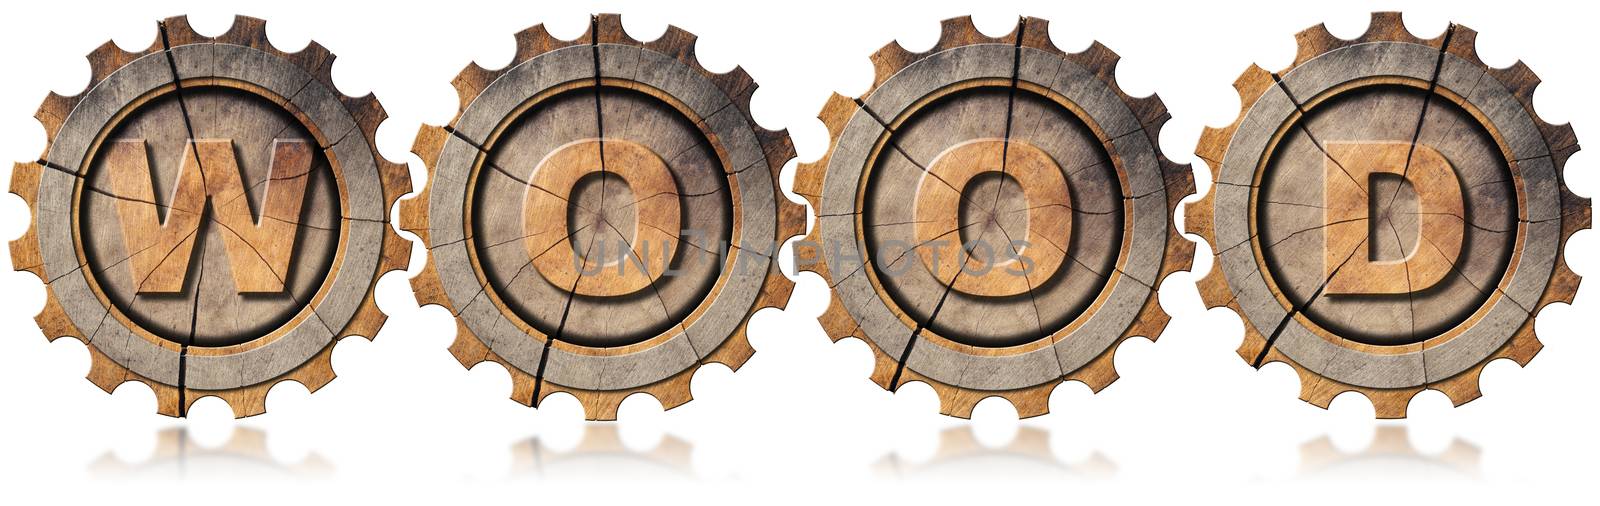 Wooden symbol with text wood and four wooden gears. Isolated on white background